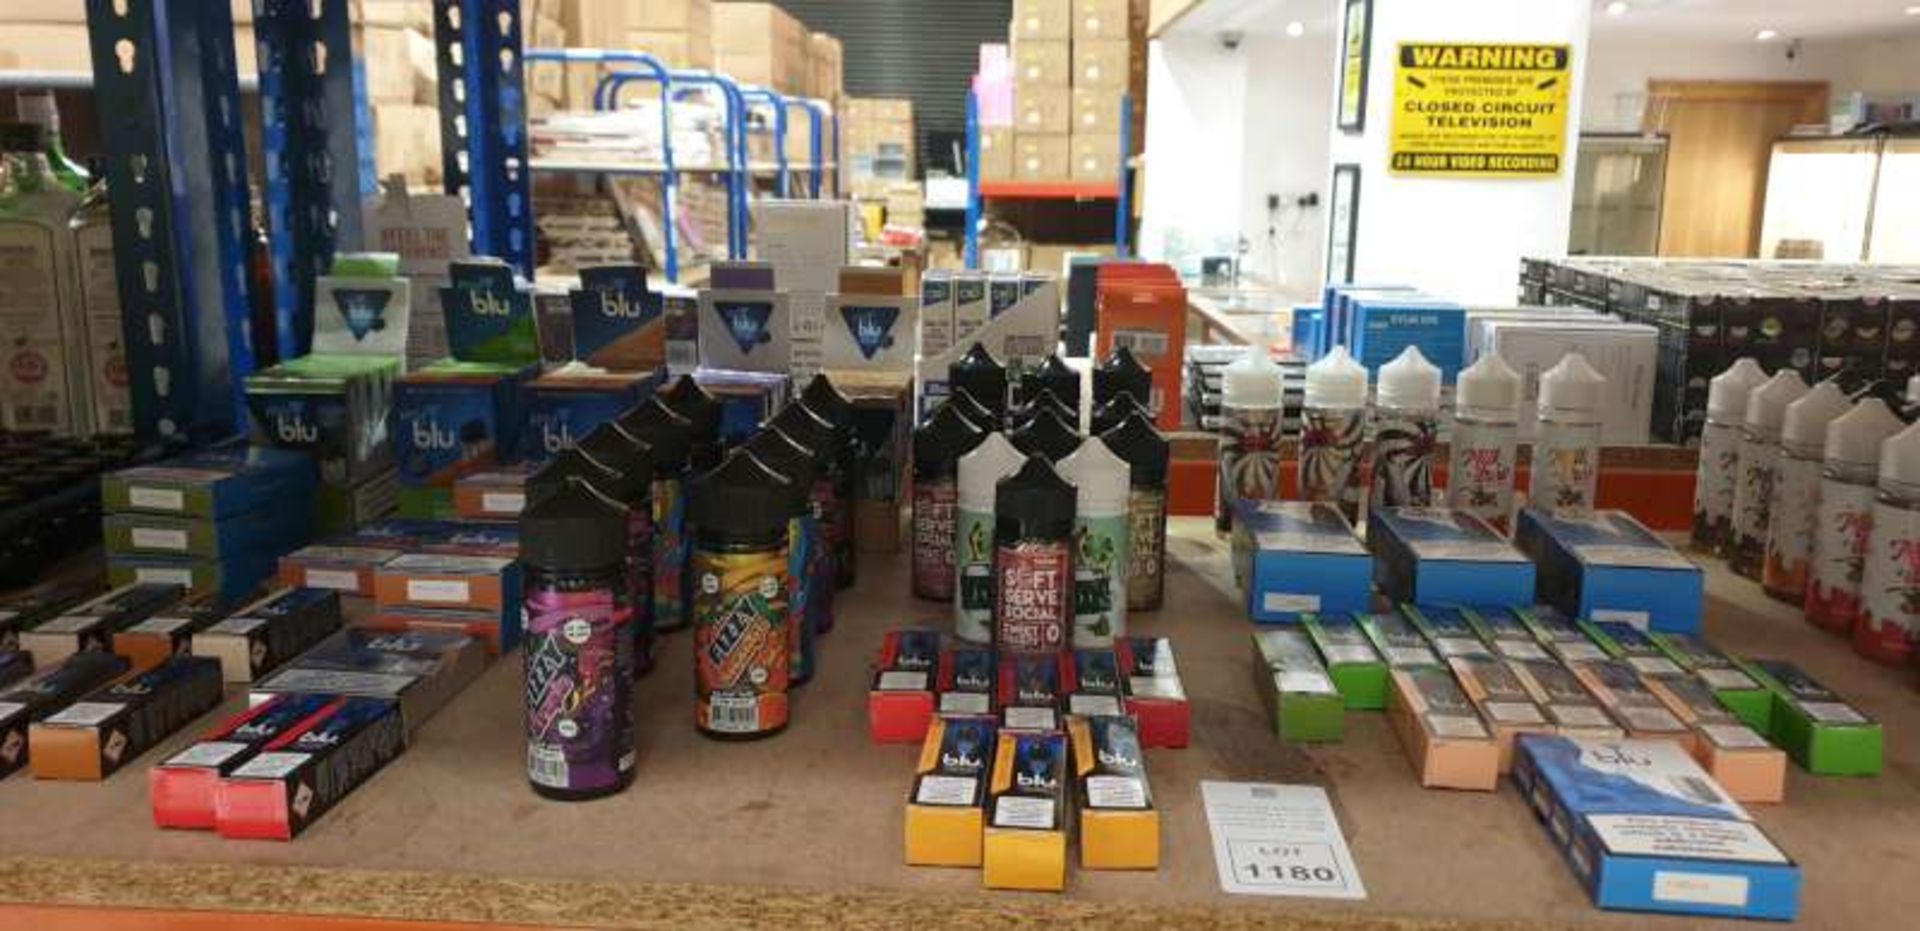 LOT CONTAINING LARGE QTY OF VAPOUR LIQUID IN VARIOUS FLAVOURS